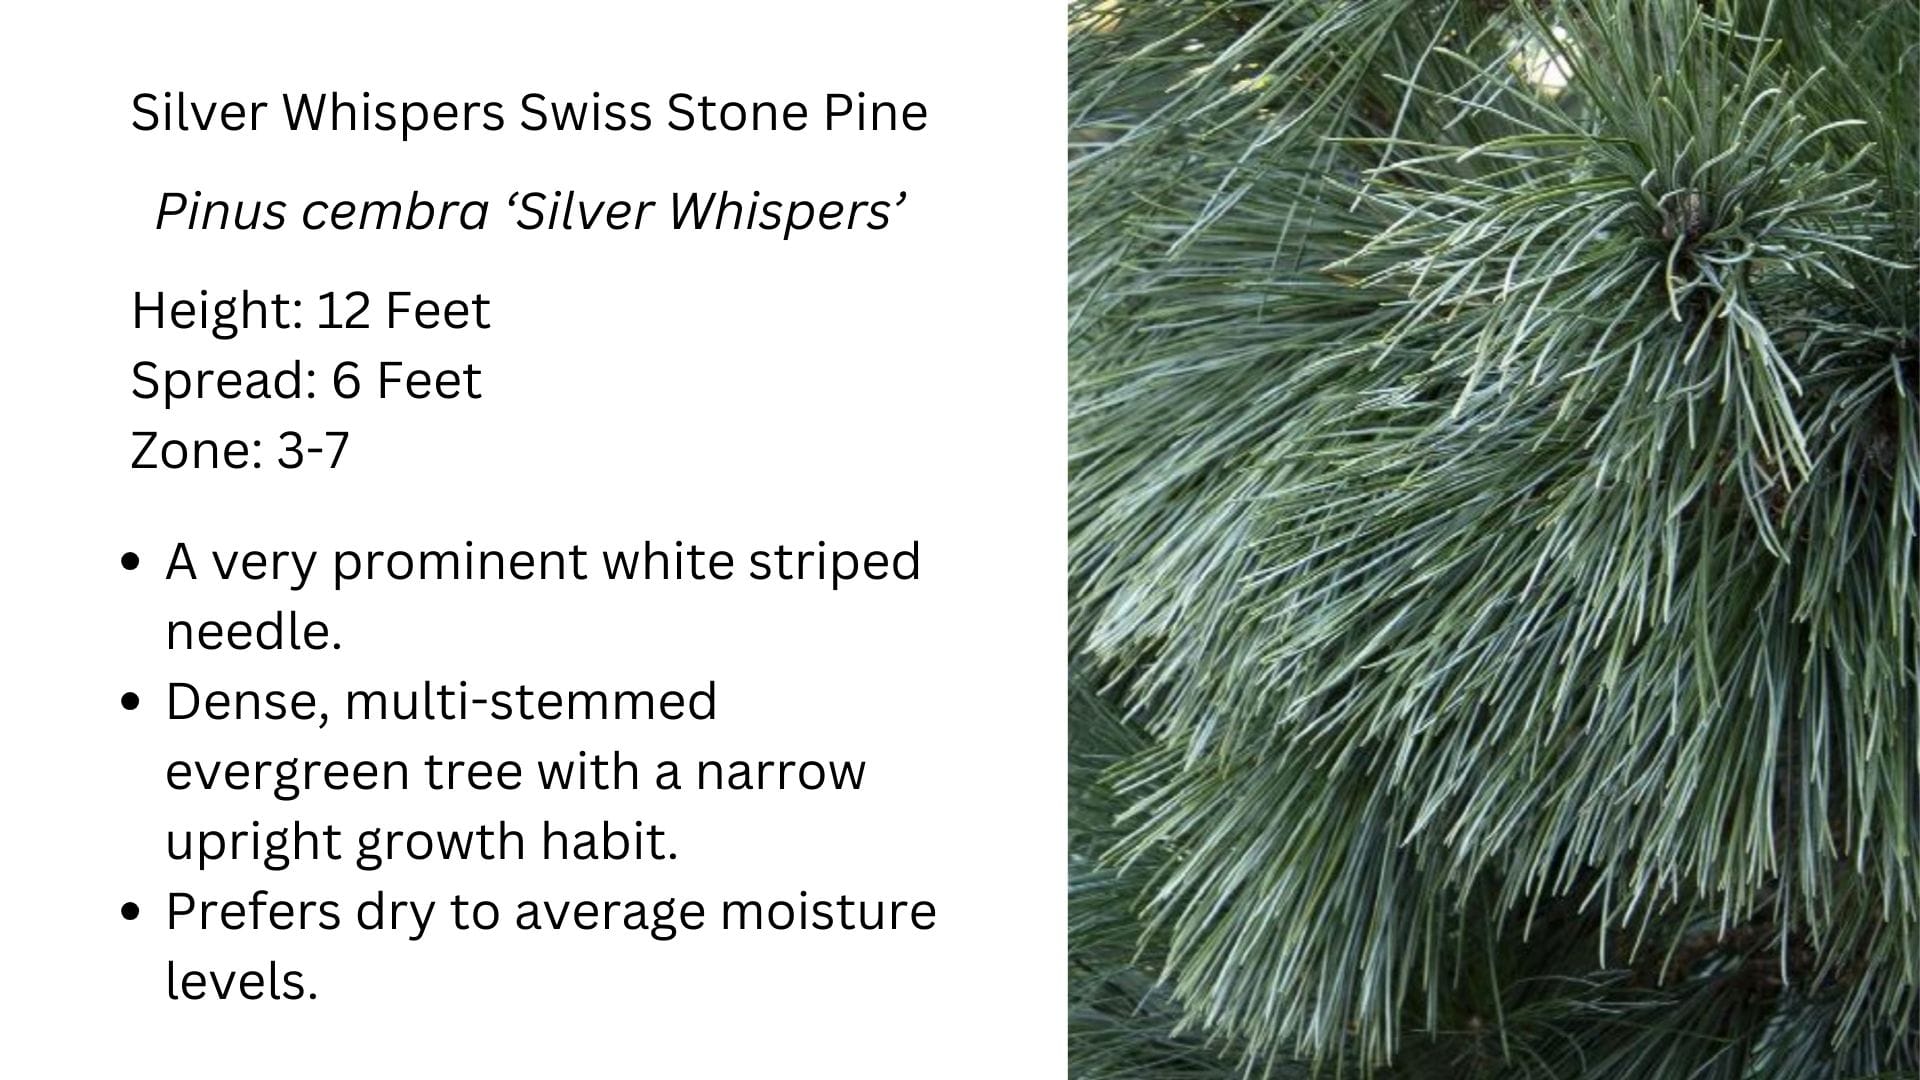 Silver Whispers Swiss Stone Pine, Pinus cembra 'Silver Whispers'